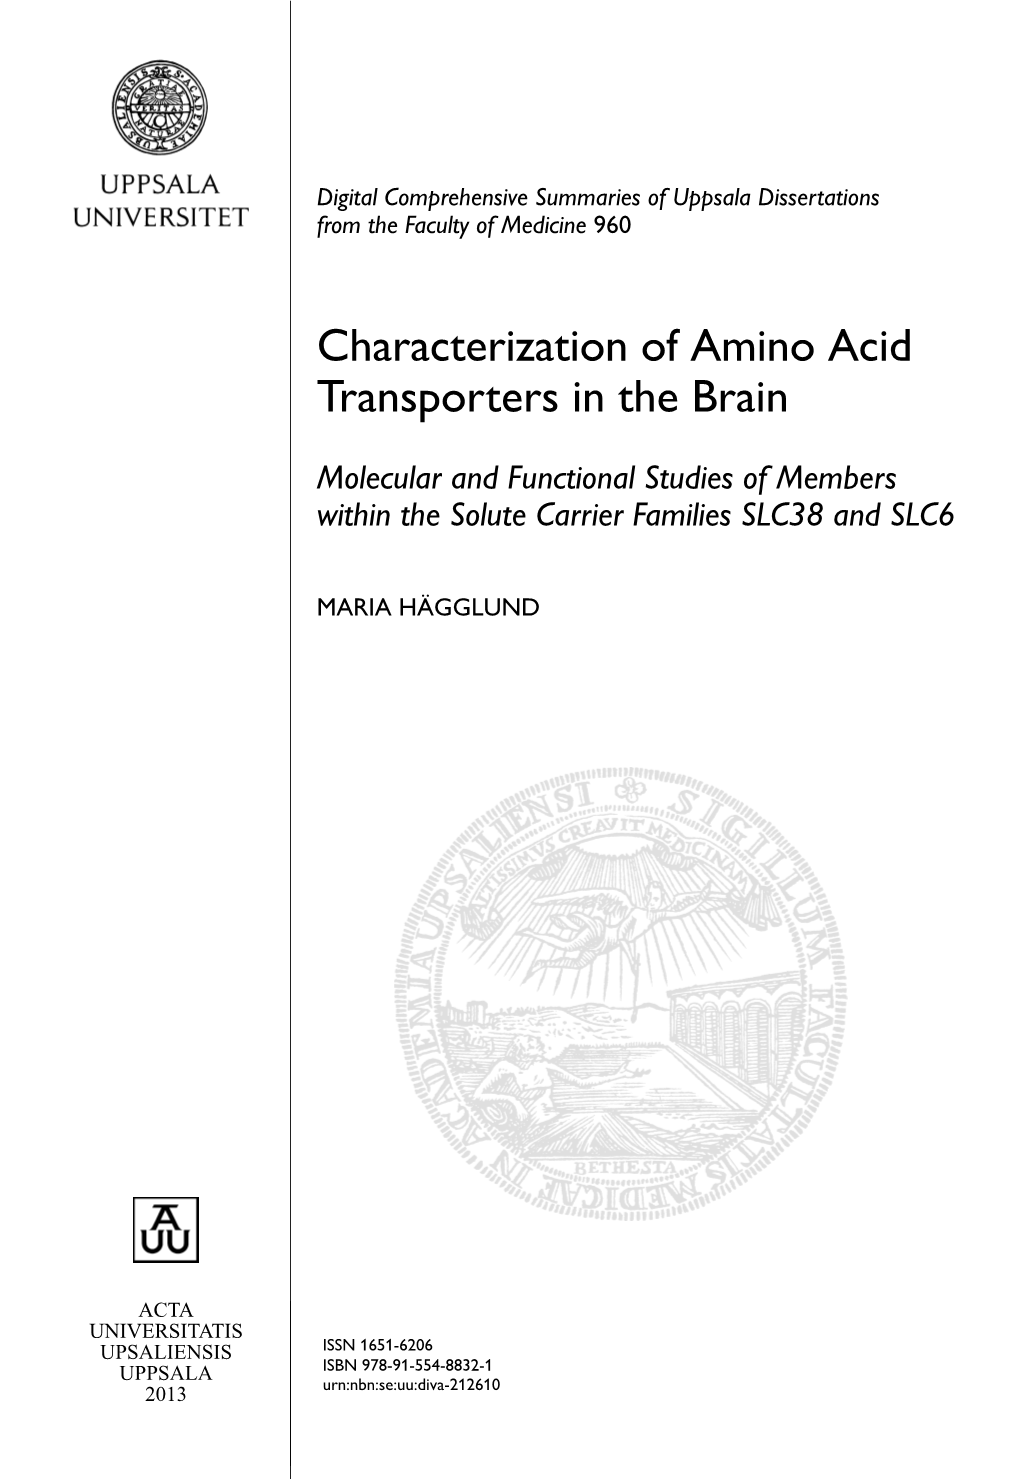 Characterization of Amino Acid Transporters in the Brain